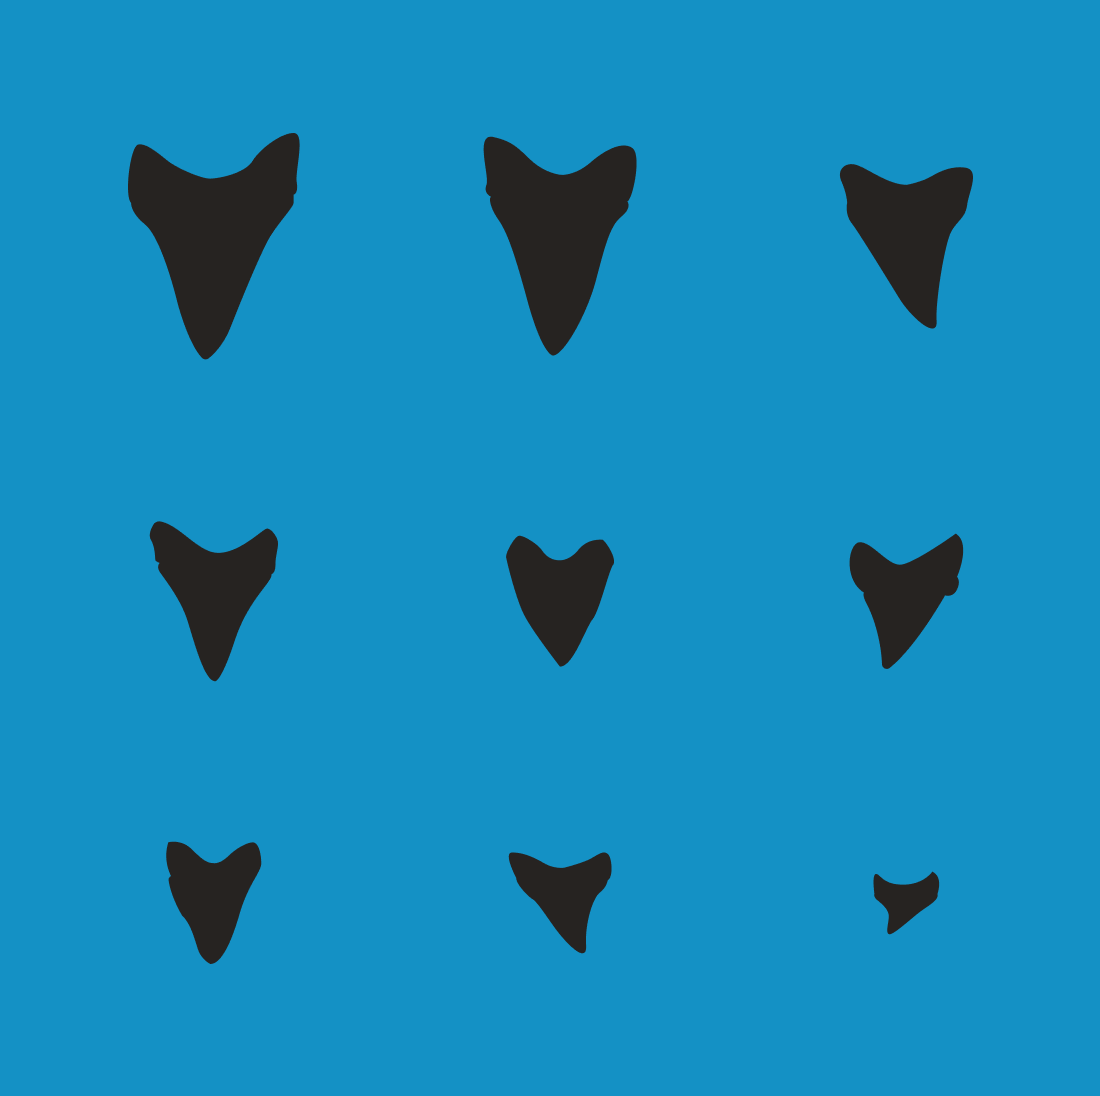 Nine black shark teeth from large to small on a blue background.